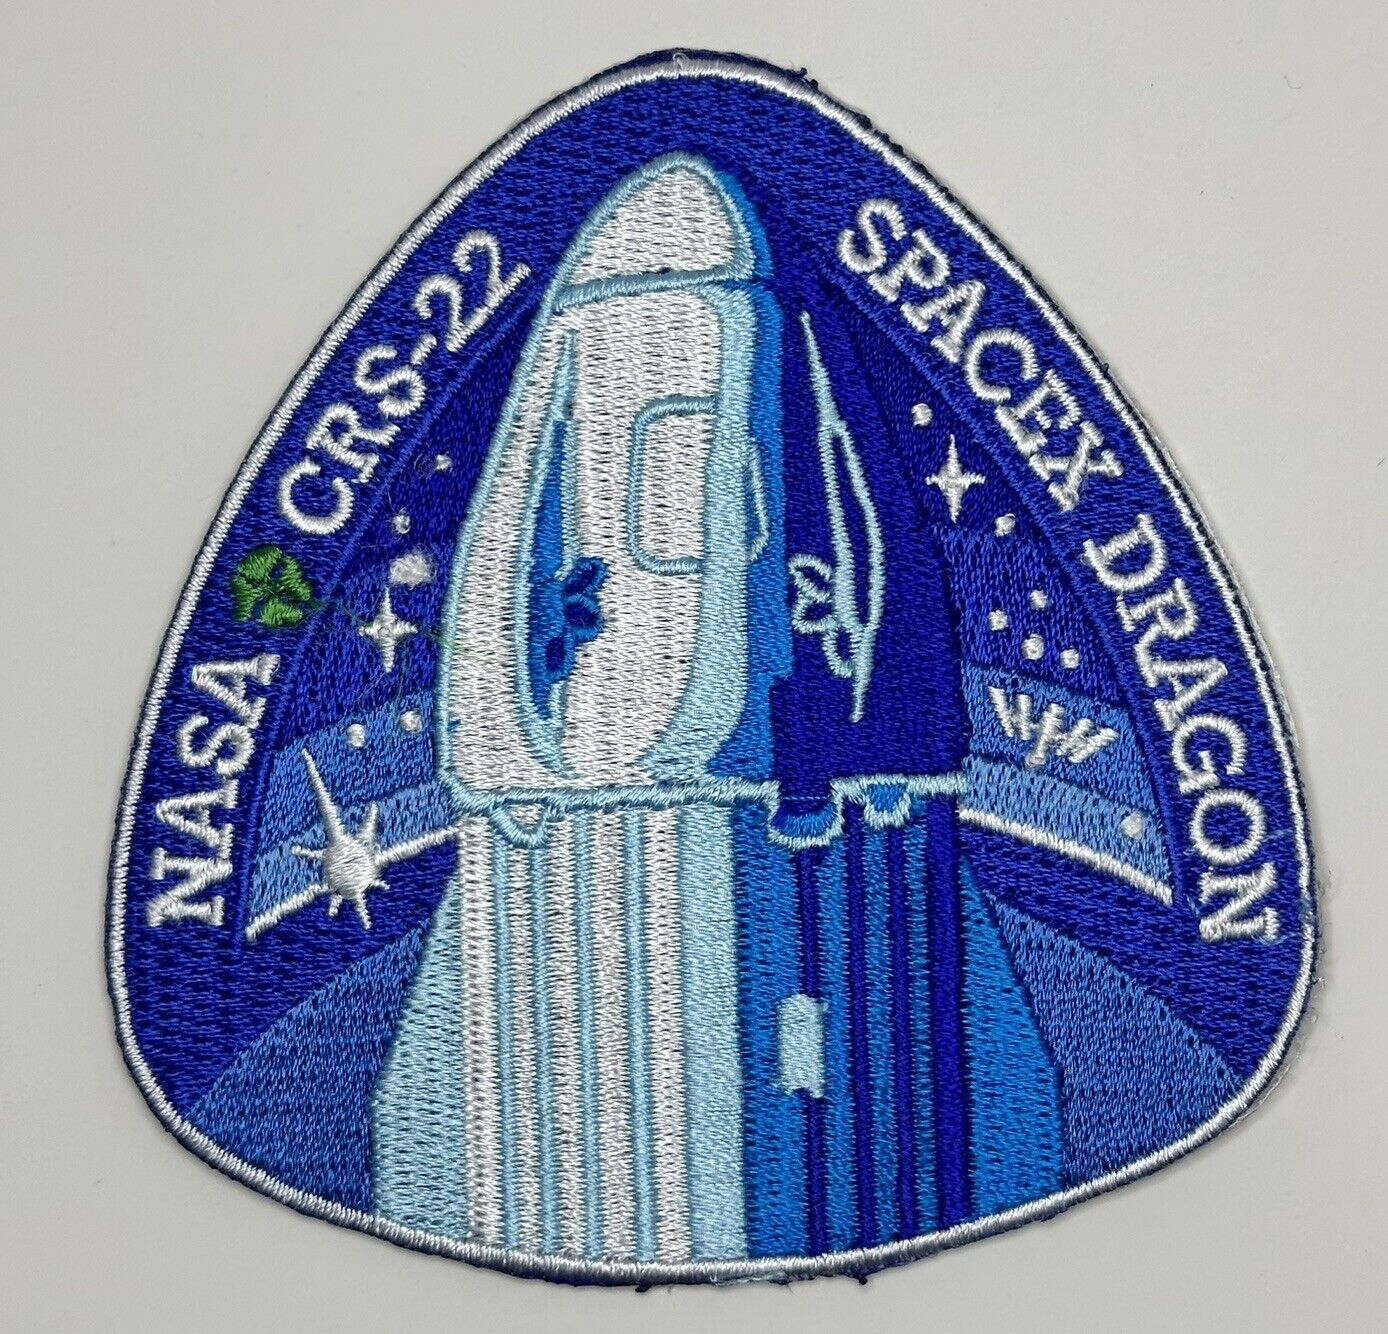 Original SPACEX CRS-22 DRAGON ISS RESUPPLY MISSION PATCH 3” NASA FALCON 9